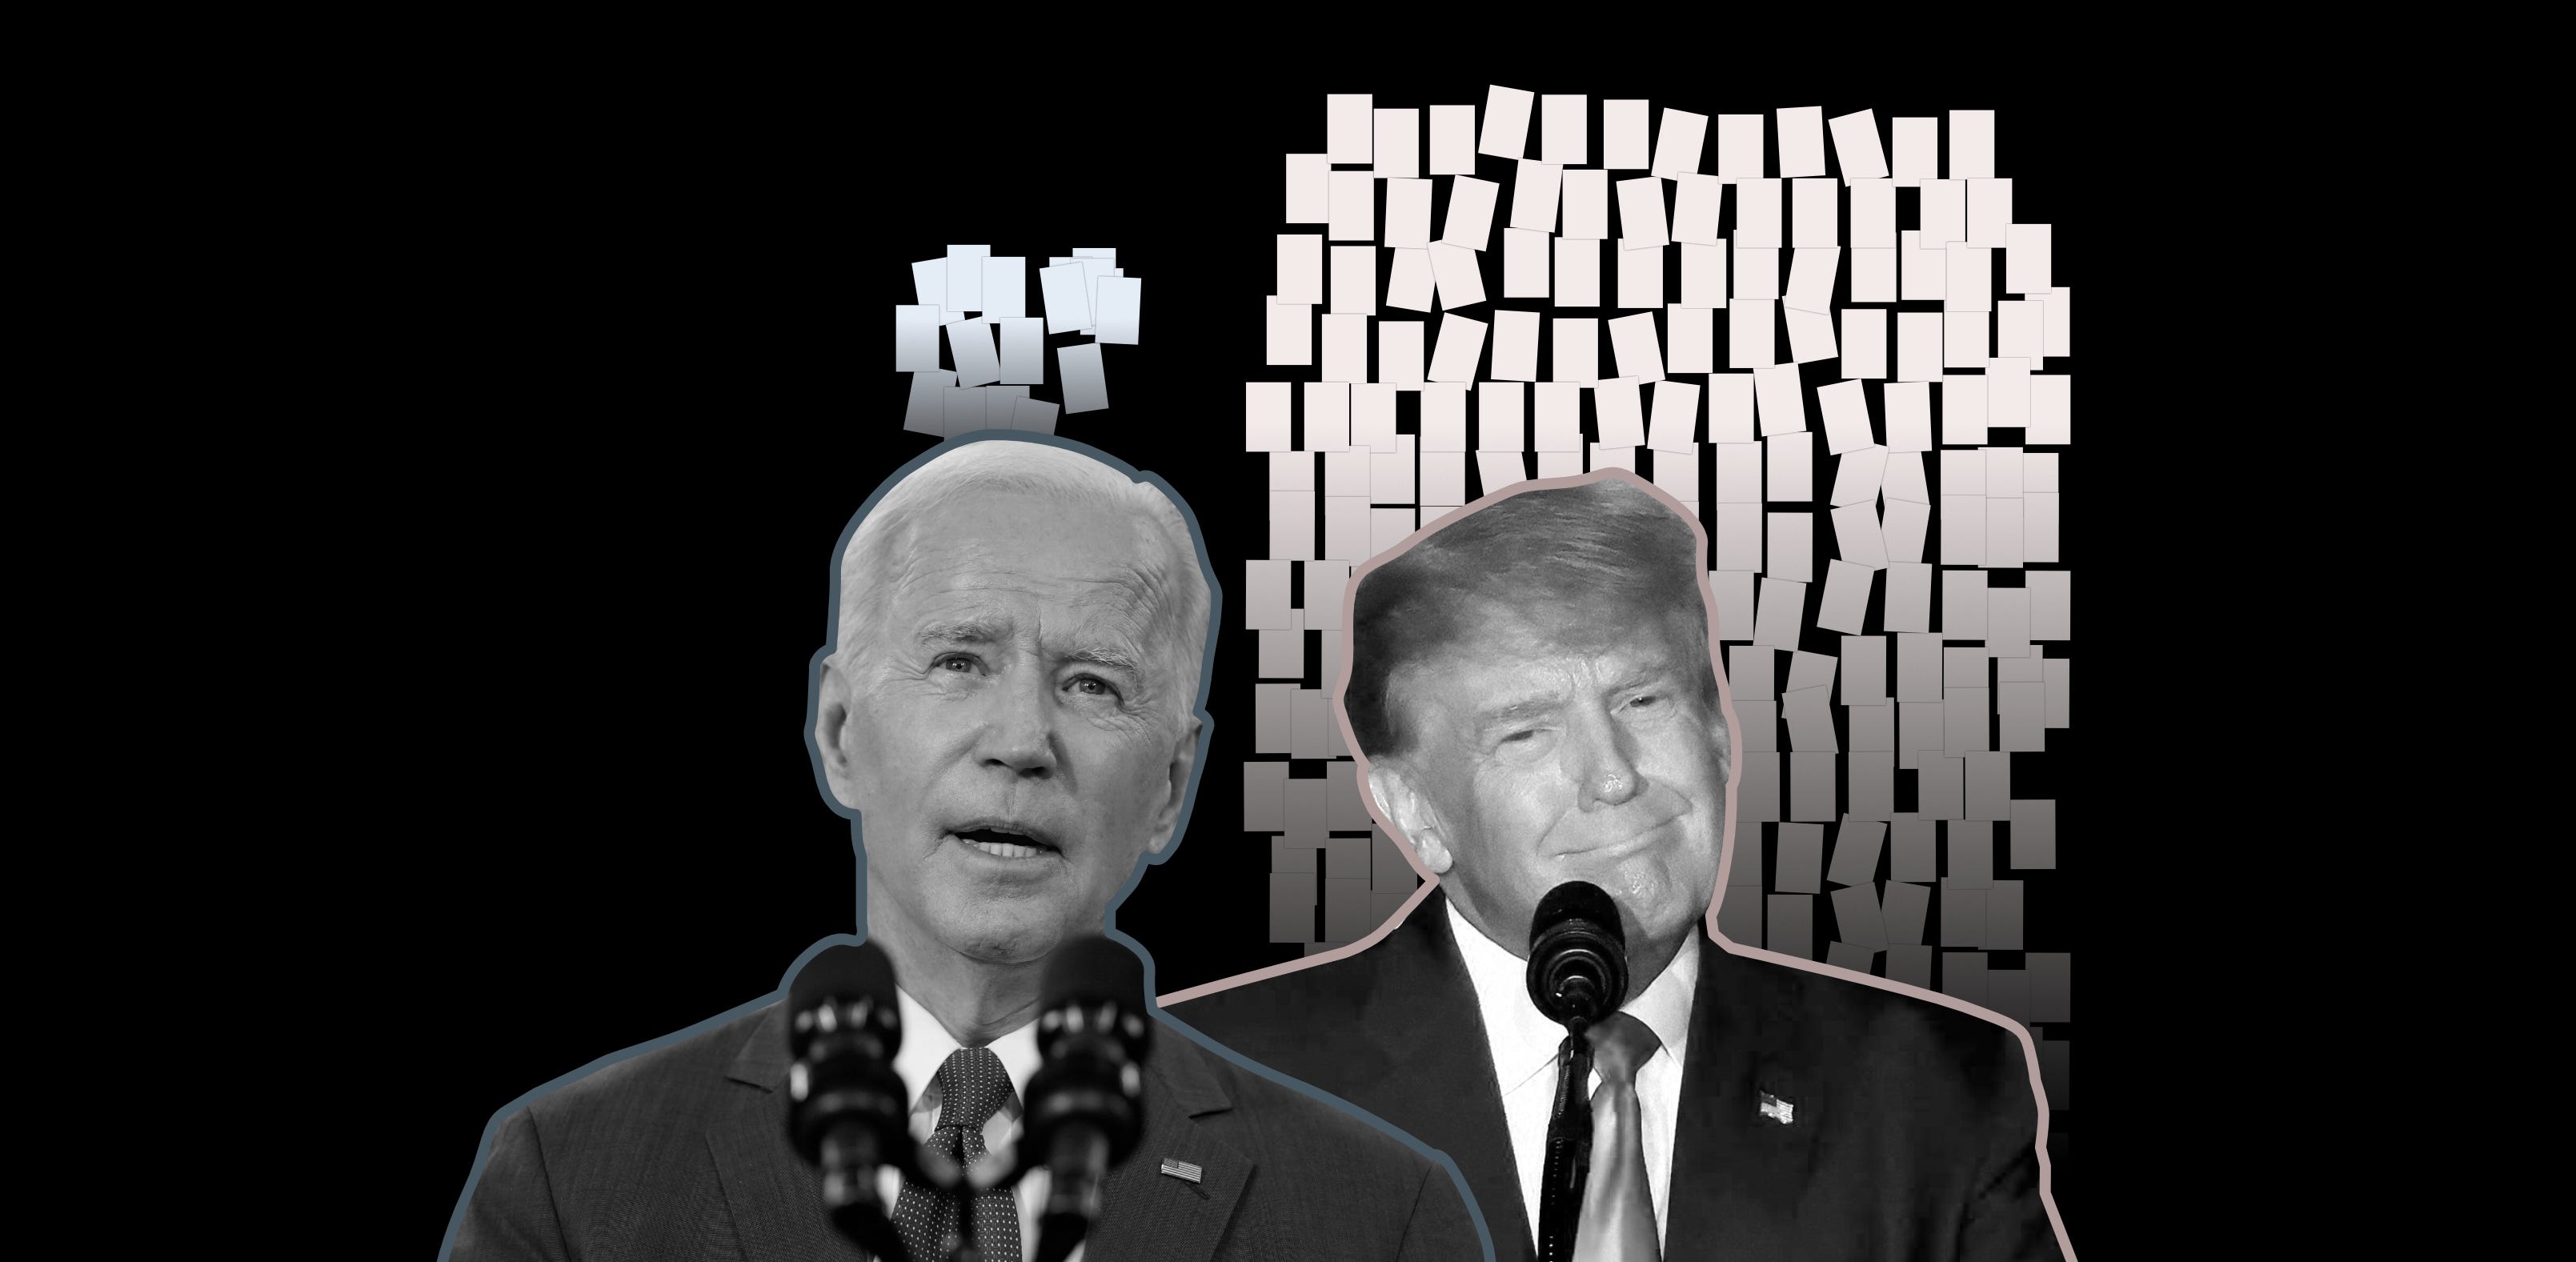 Graphics: How Biden's case differs from Trump's classified documents seized at Mar-a-Lago